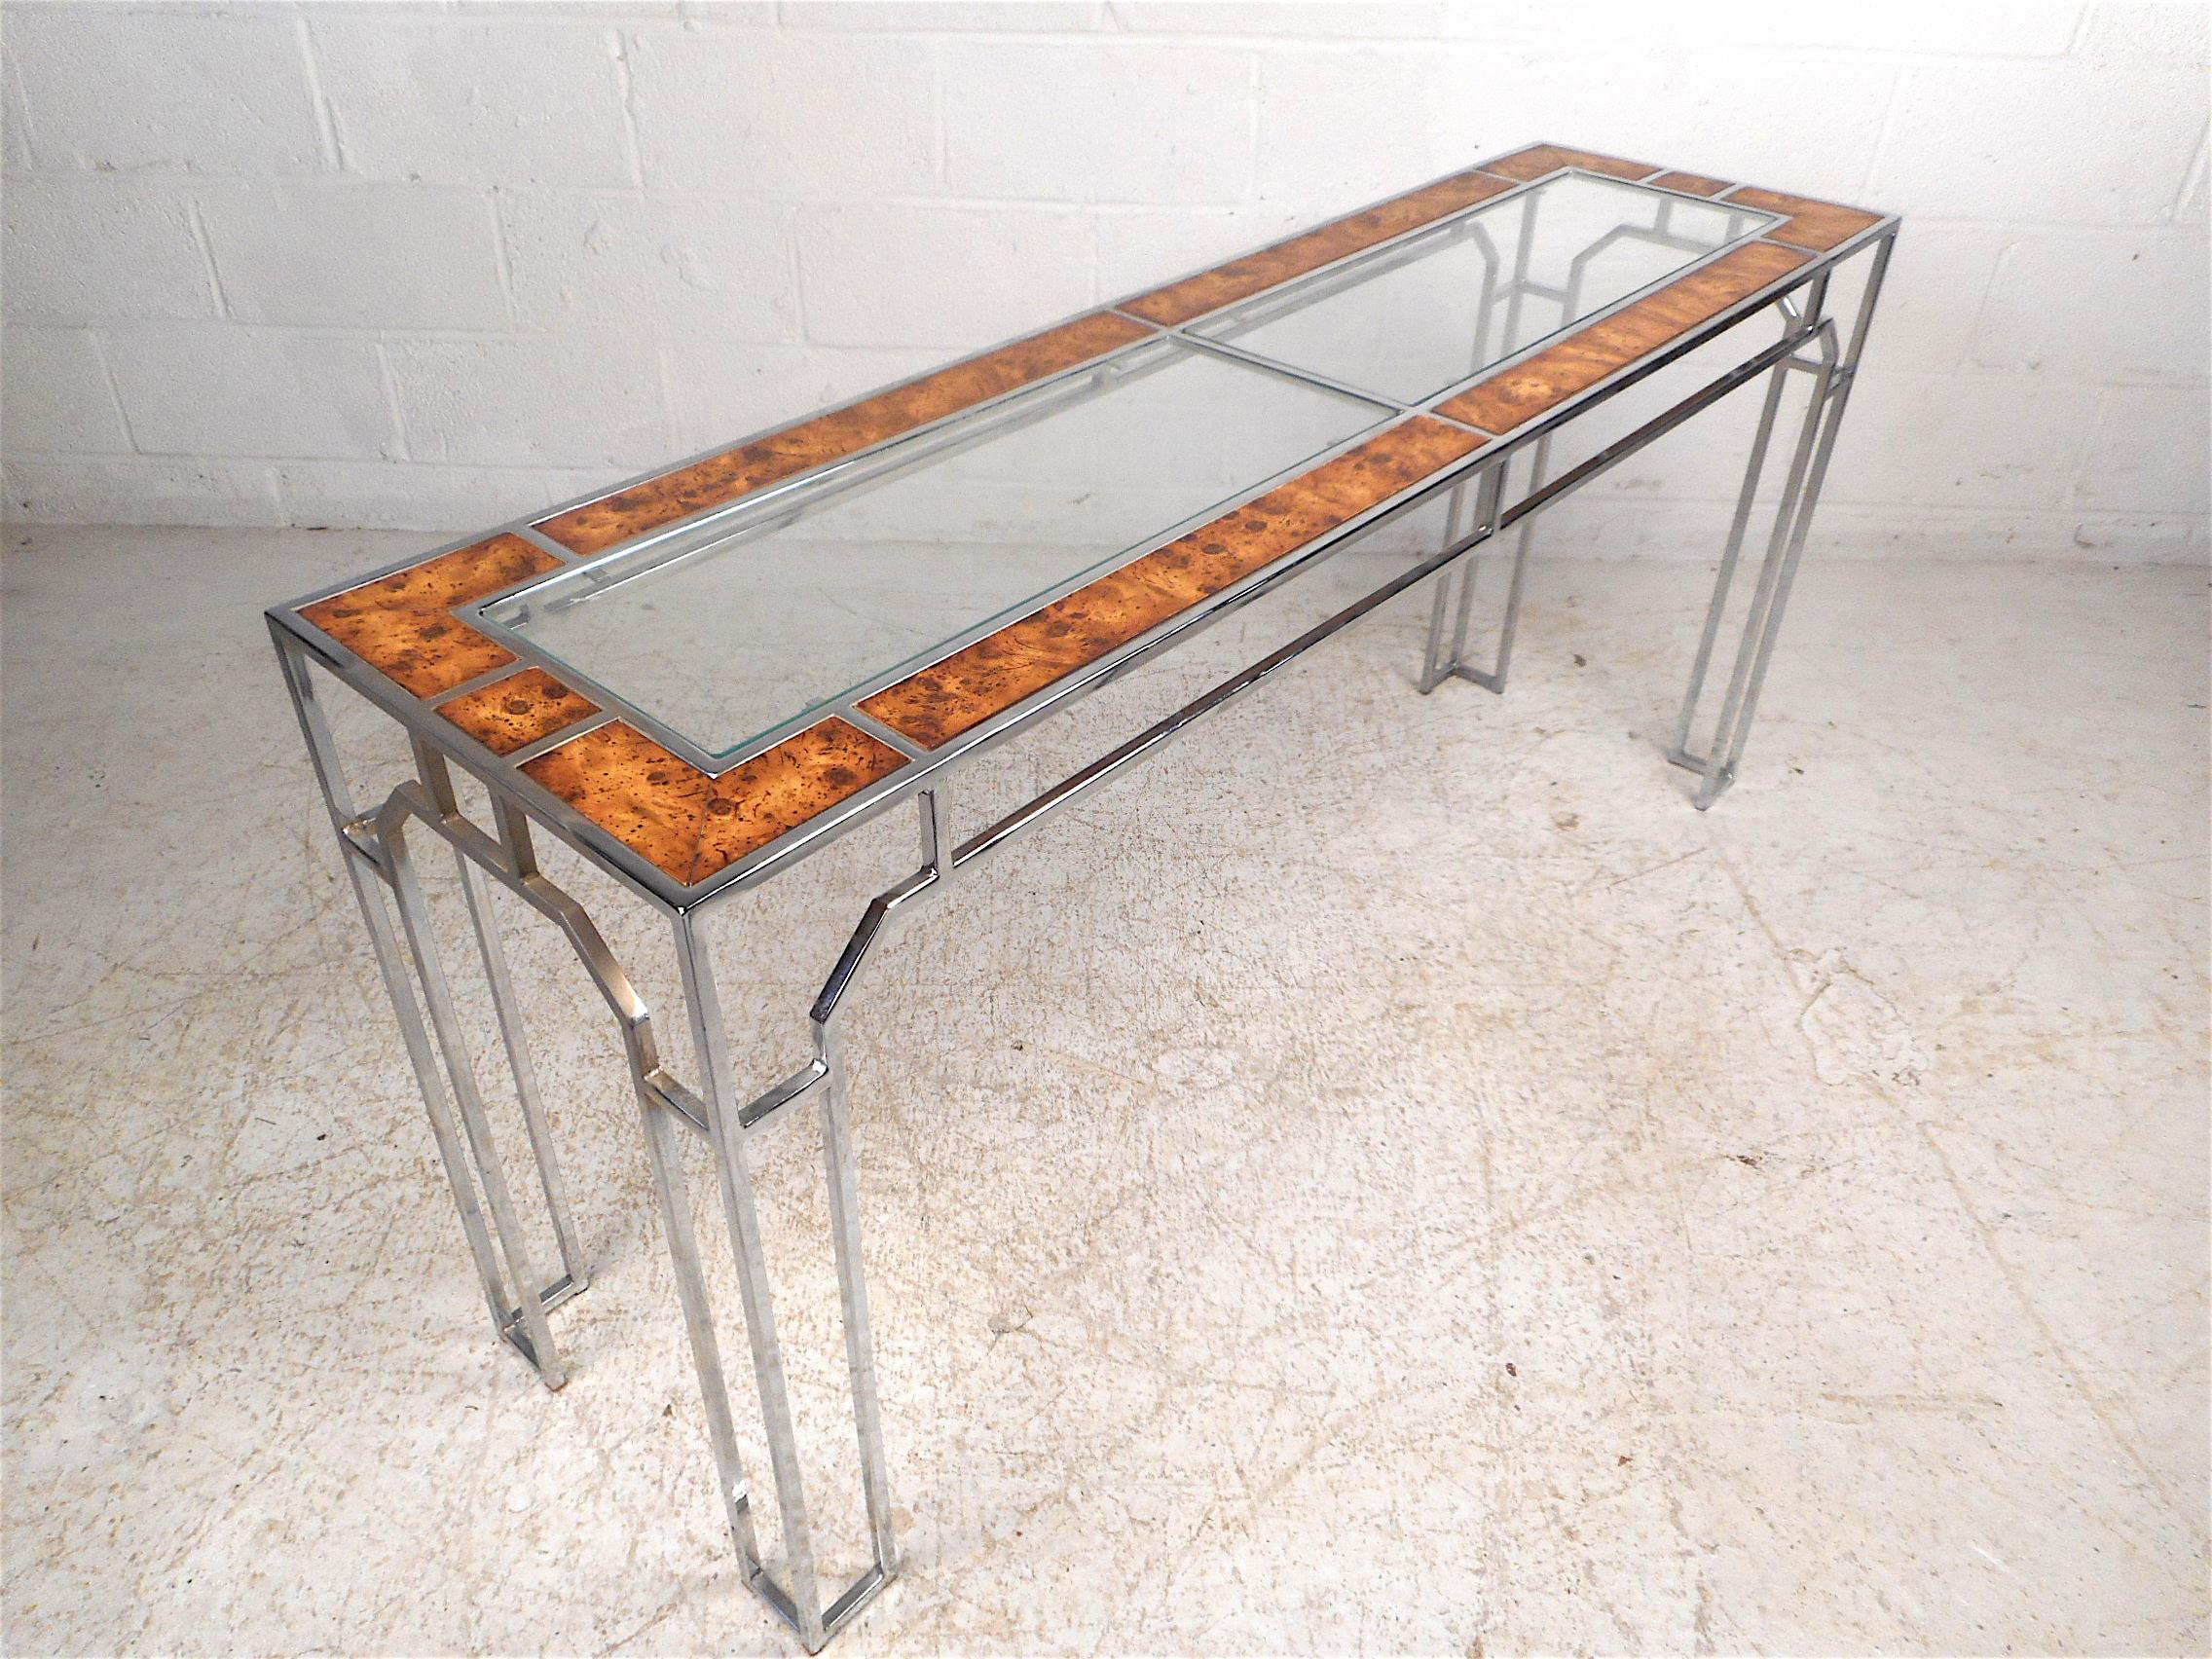 Stylish console table by Milo Baughman. Sleek angular chrome frame with burl inlays and two glasses inserts which serve as a tabletop. Great addition to any modern interior, circa 1960s. Please confirm item location with dealer (NJ or NY).